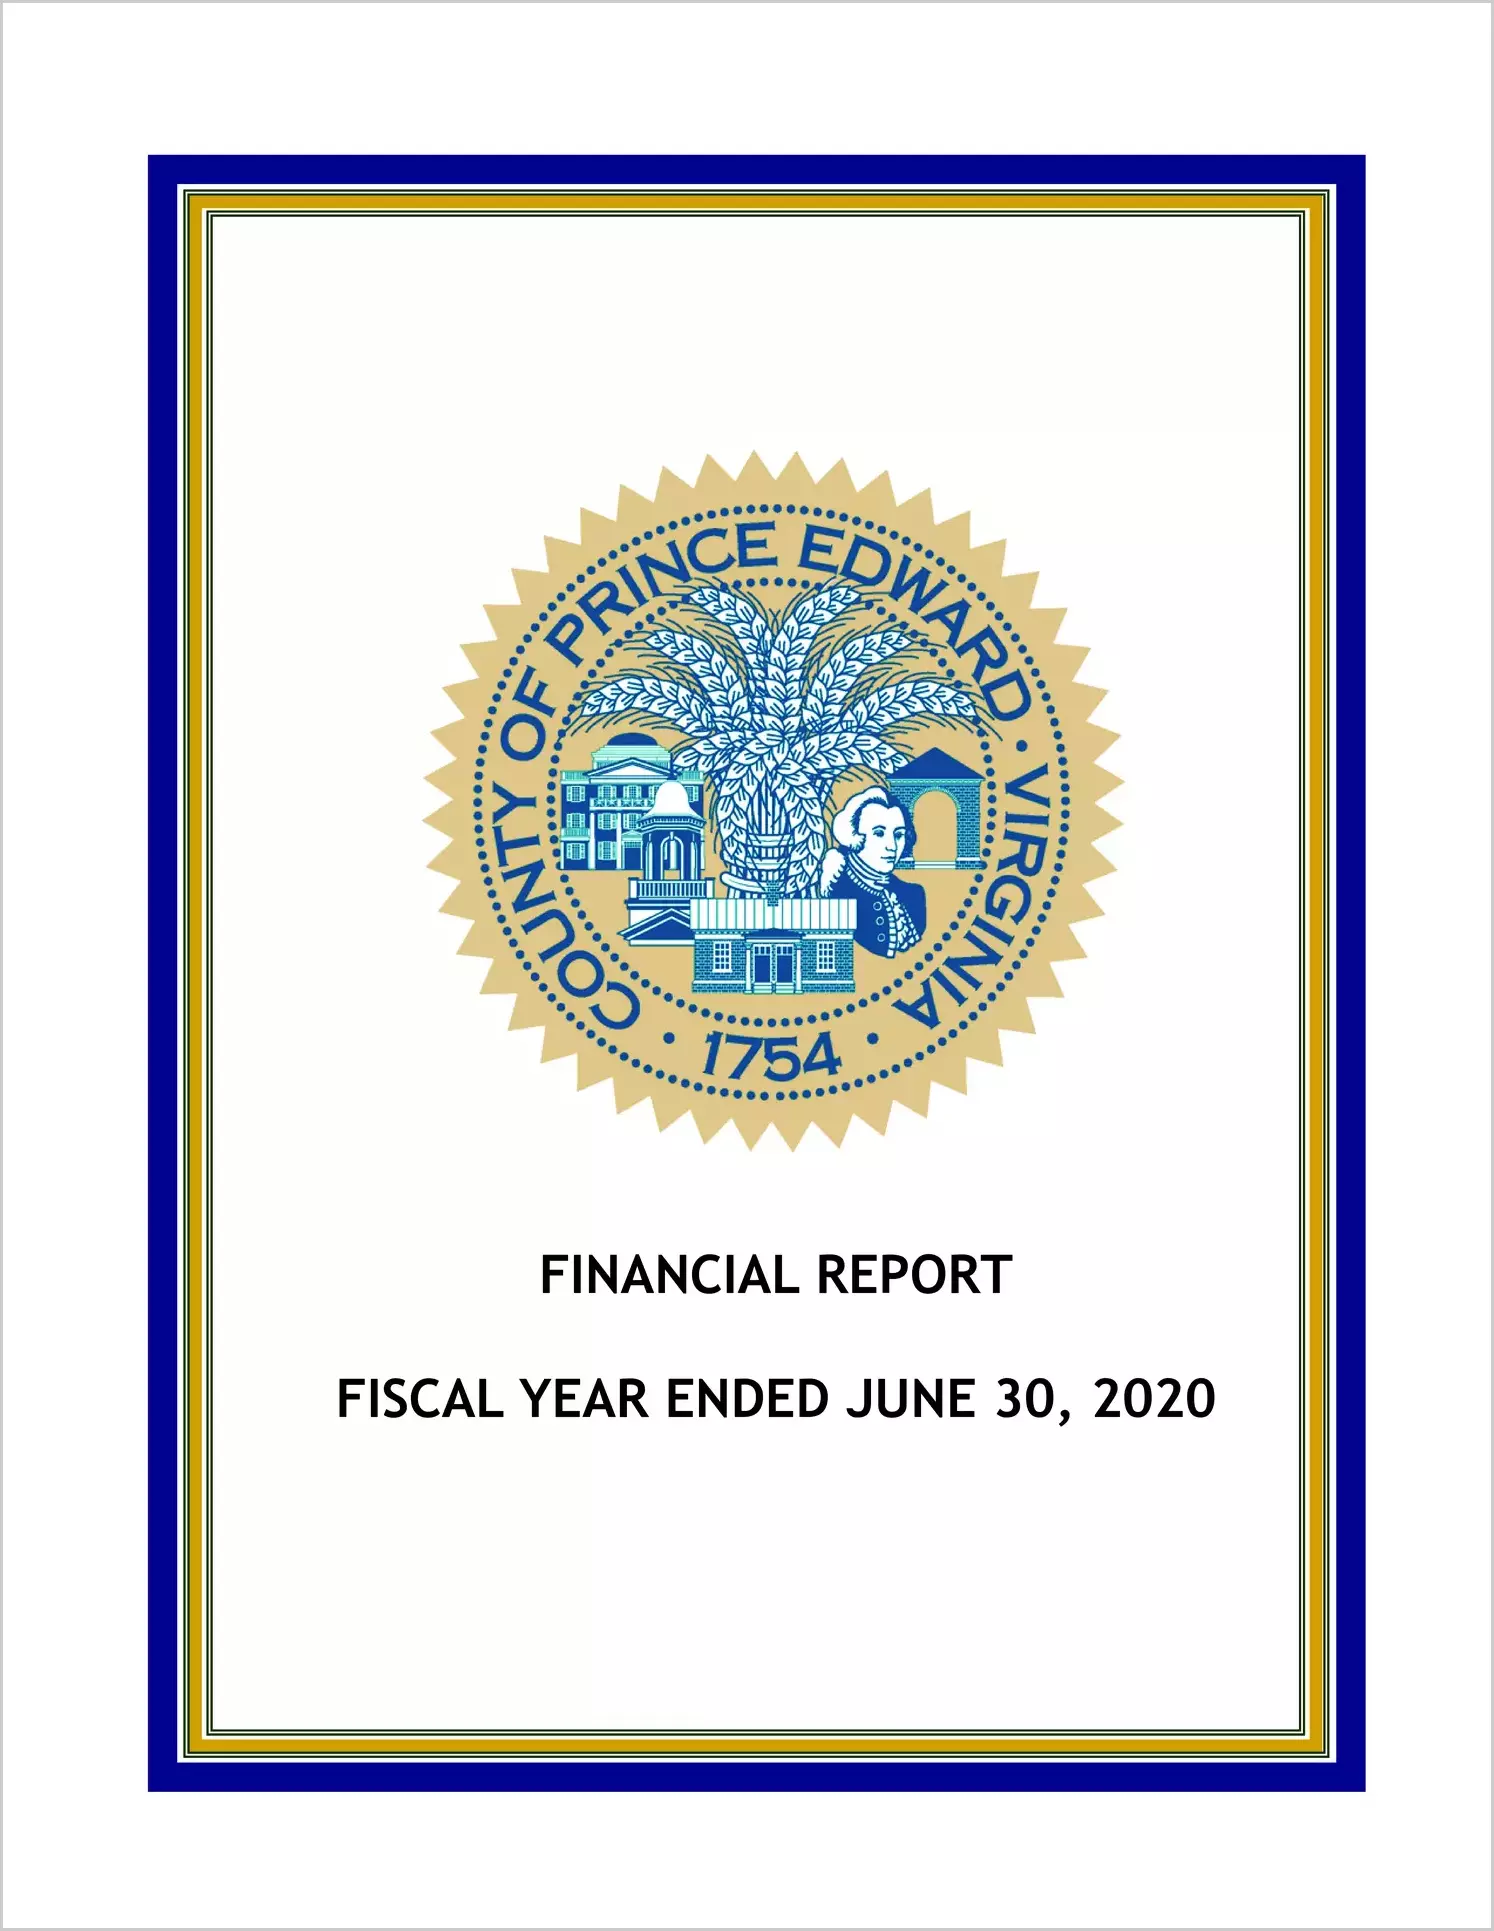 2020 Annual Financial Report for County of Prince Edward